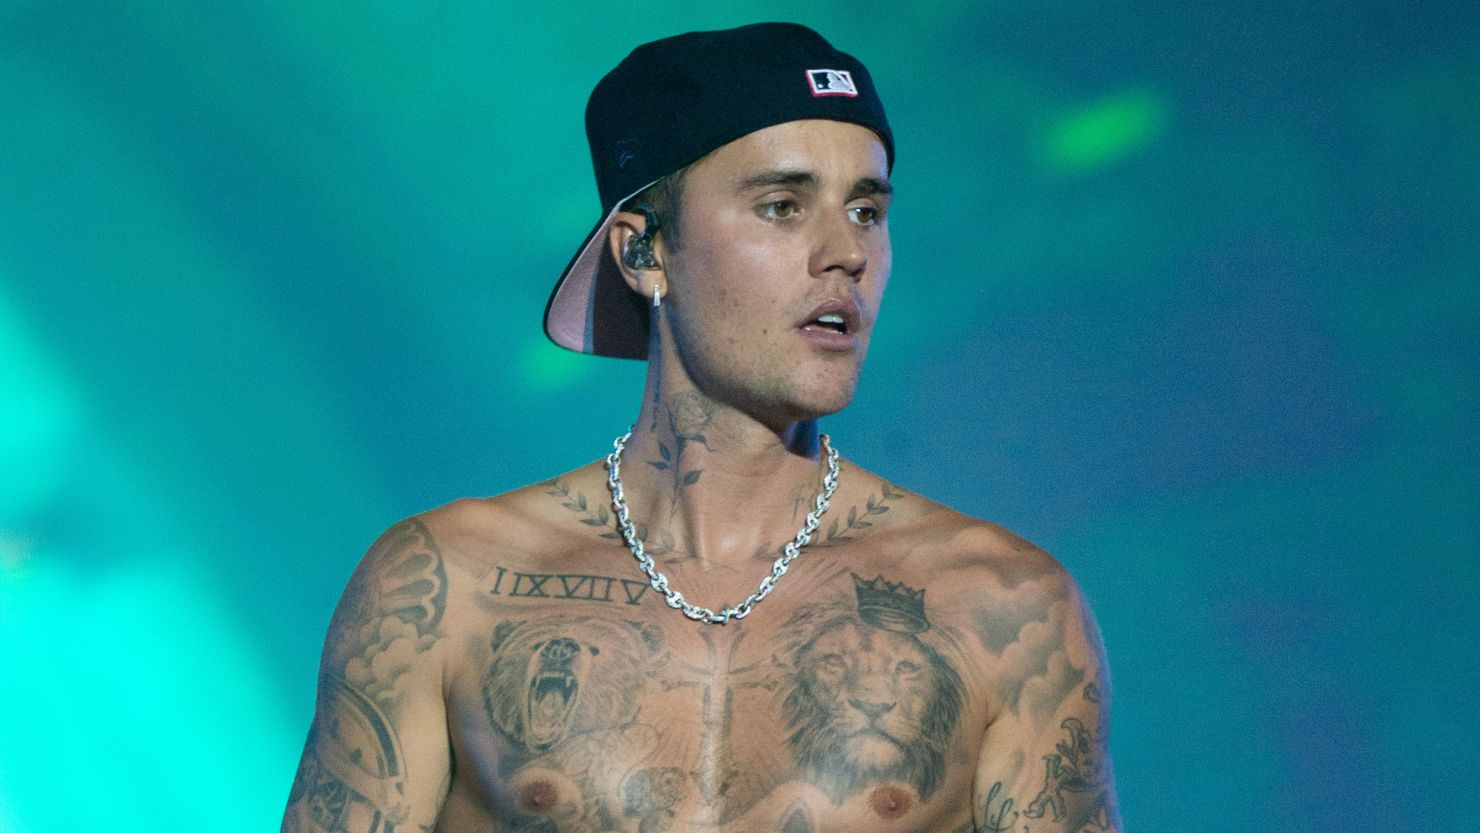 Justin Bieber, seen here performing at the Sziget Festival 2022 on August 12, 2022 in Budapest, Hungary, has ended his tour for now, according to an official statement. 